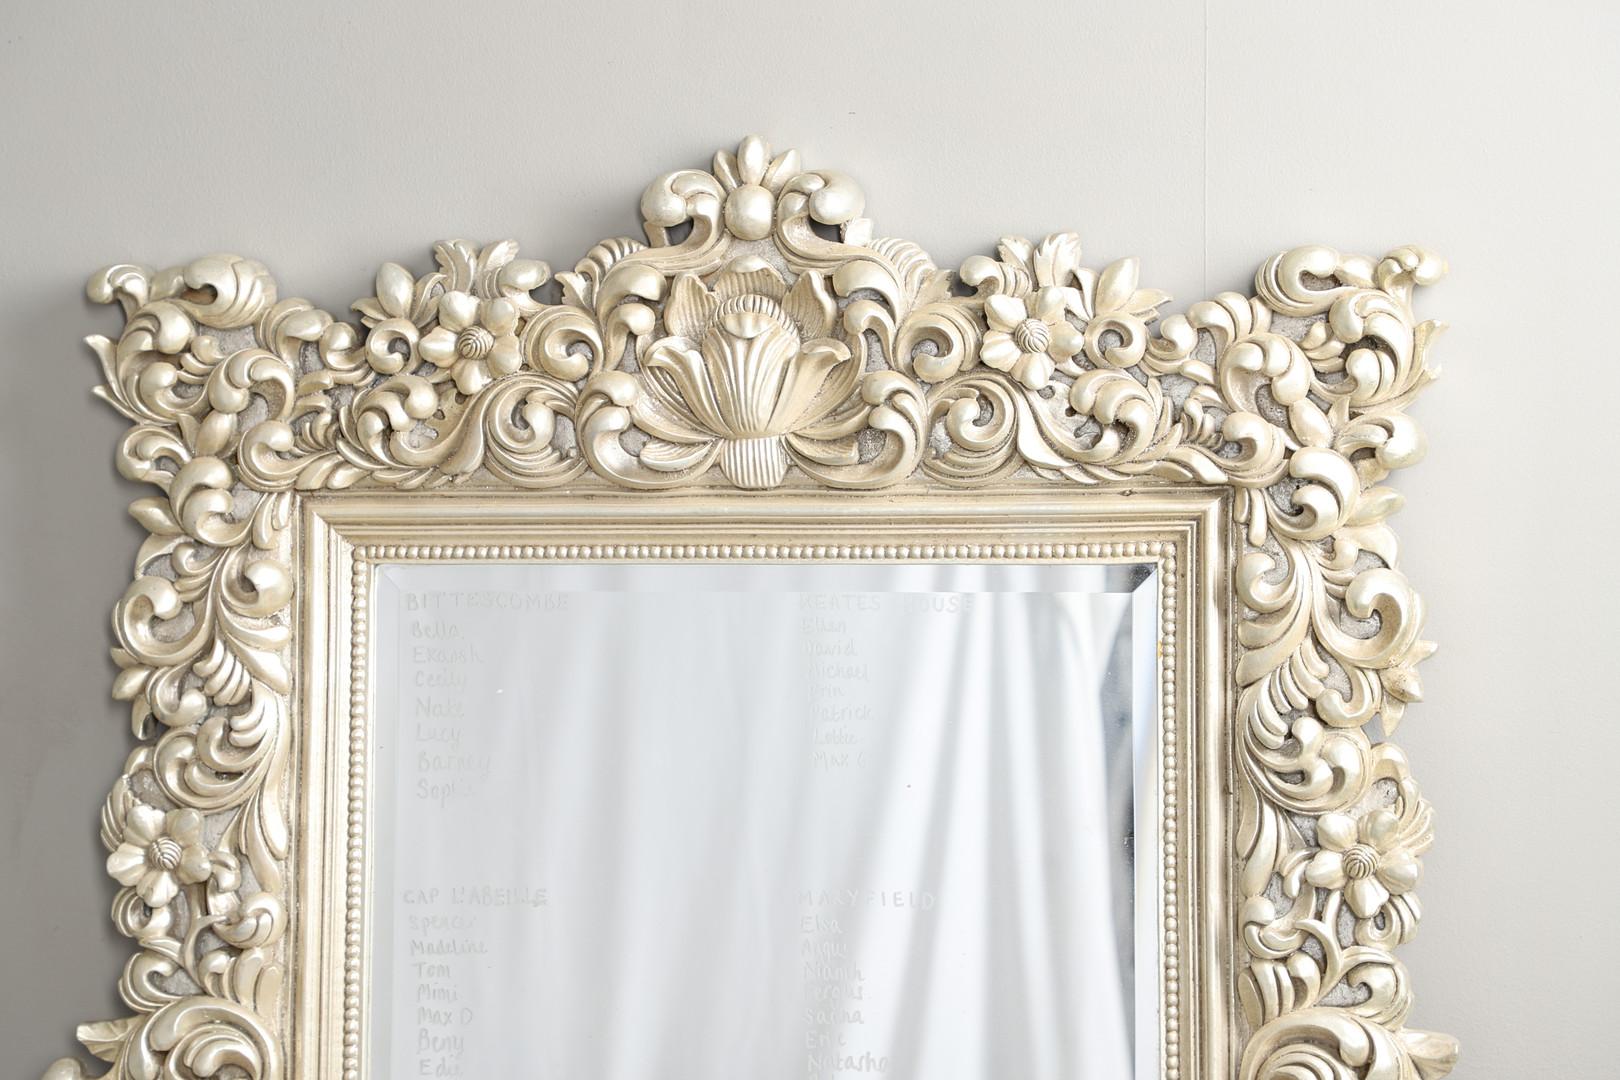 Silvered Luxury Wall Mirror, Antique Silver Plated Rococo Floral Modern Console Mirror For Sale